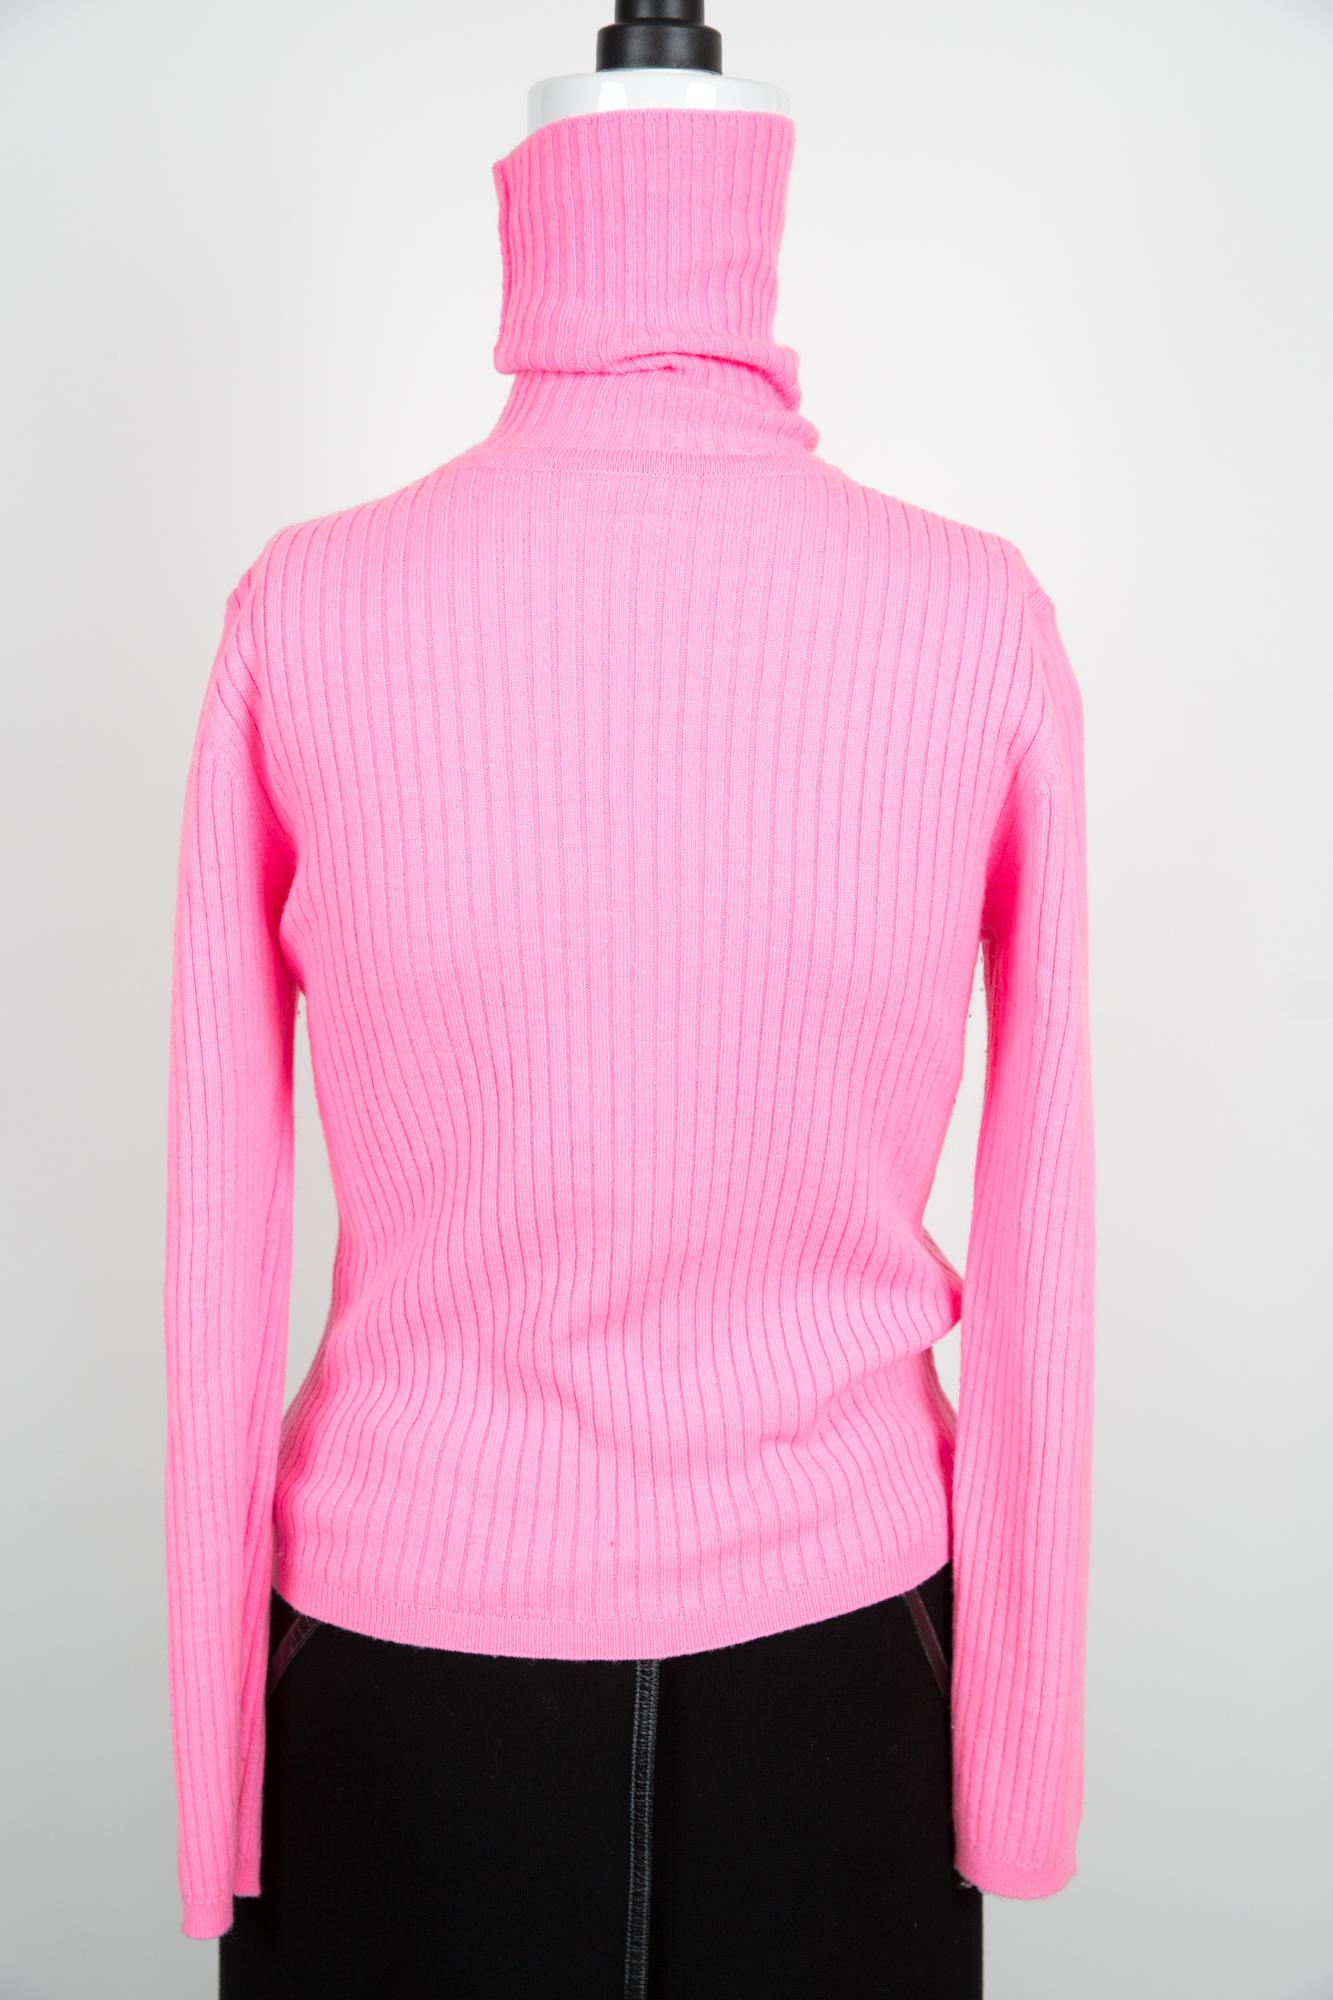 Courrèges pink ribbed top featuring a turtle neck, a fitted cut, a front white logo. 
Circa: 1980s
50% Wool Merinos/ 50% Acrylic 
In good vintage condition. Made in France.
Estimated size:36fr/ US4/ UK8
We guarantee you will receive this gorgeous